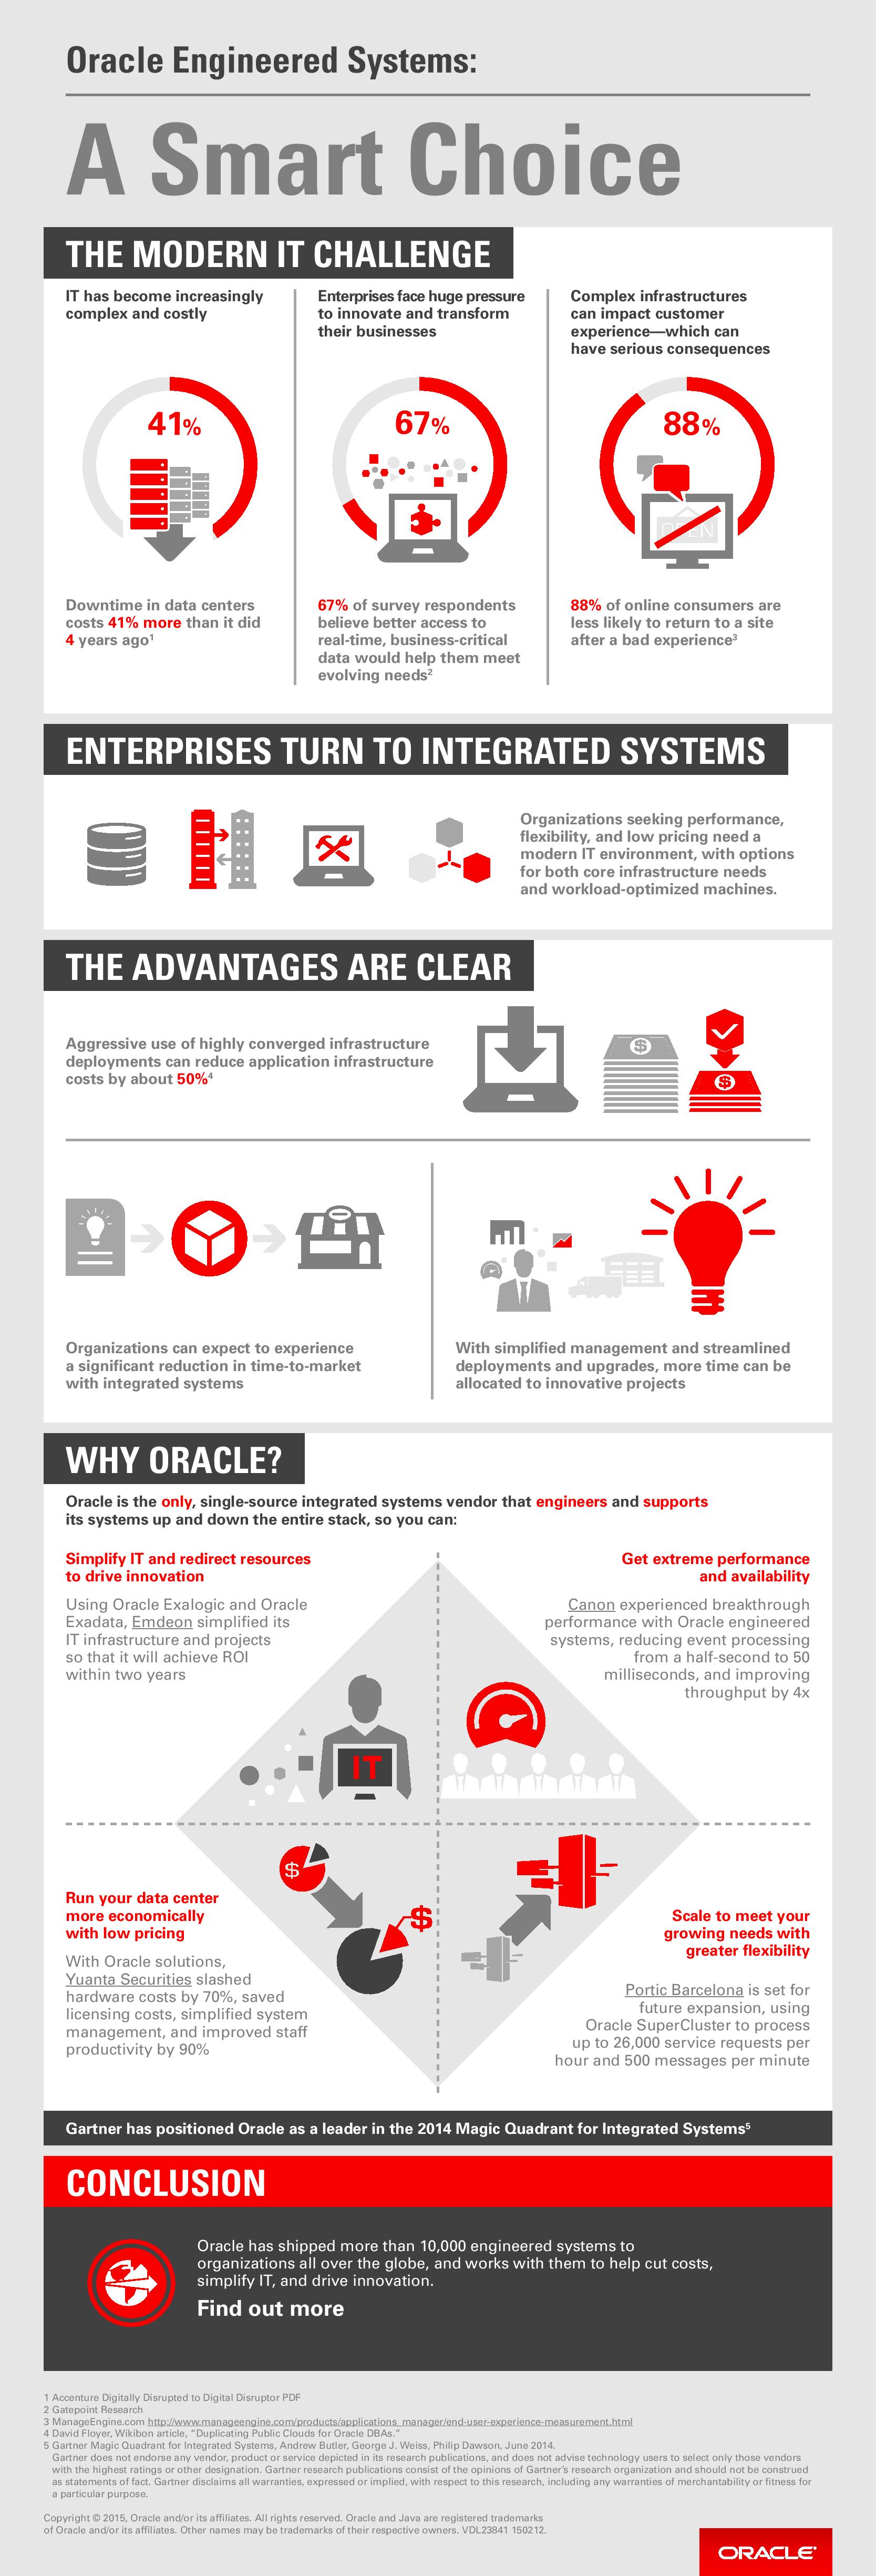 Oracle-engineered-systems-infographic